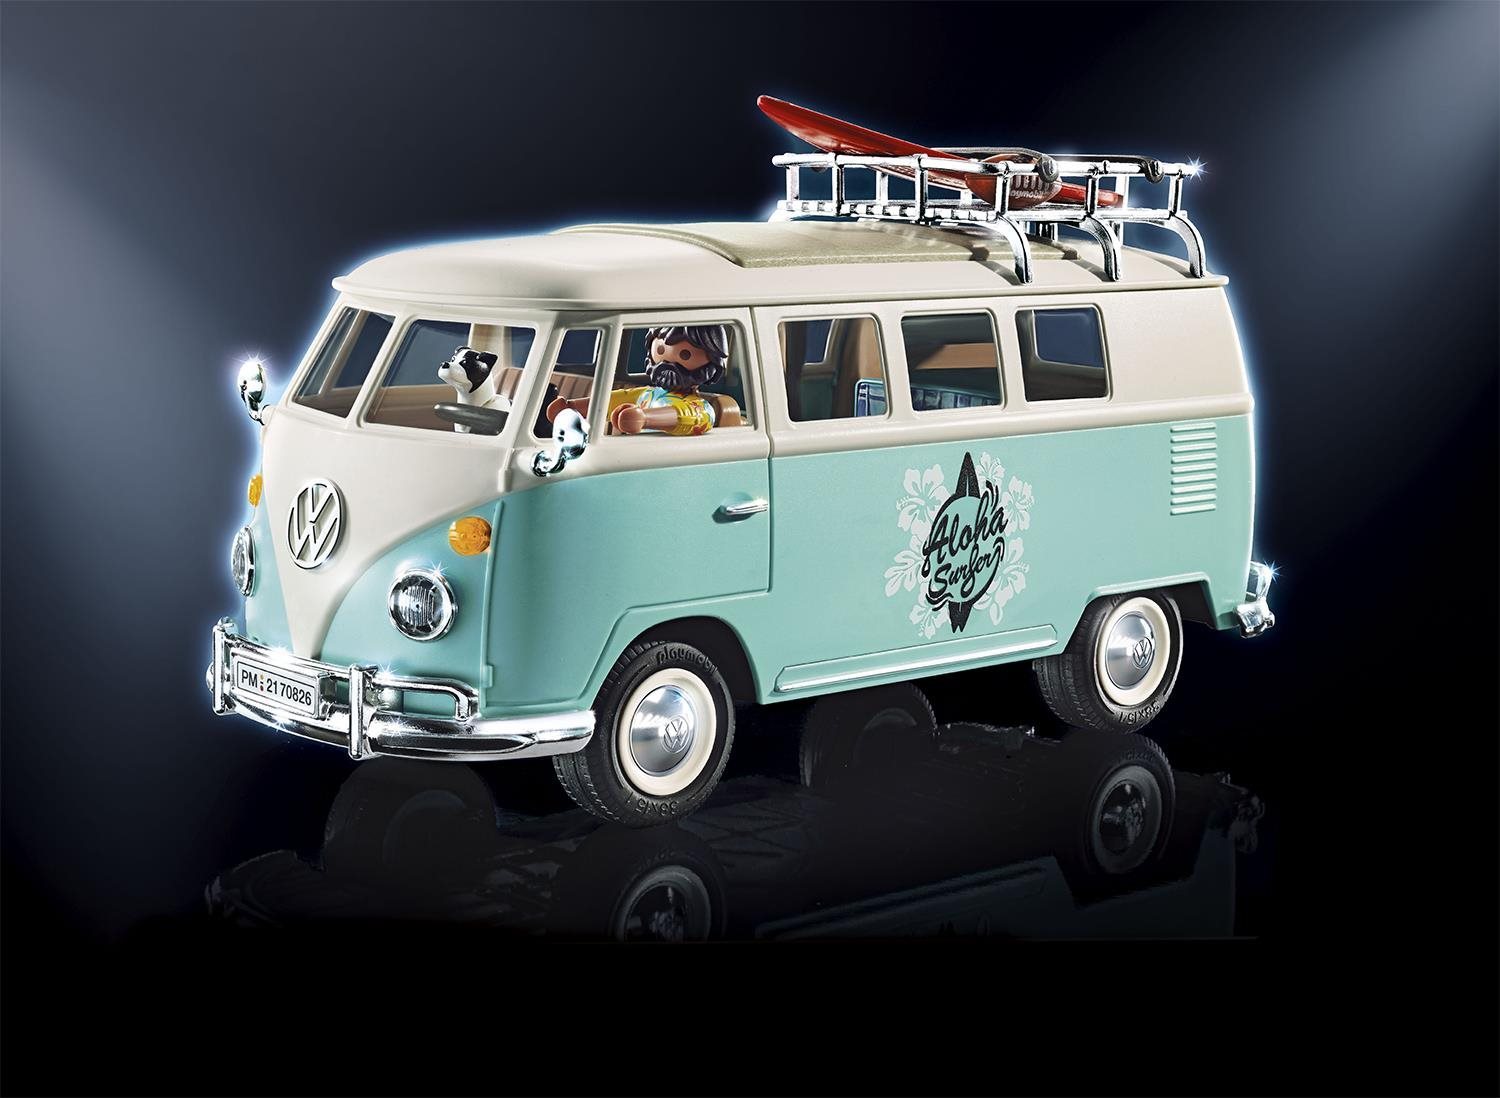 Building Set Playmobil 70826 Volkswagen T1 Bulli - Special Edition Lifestyle